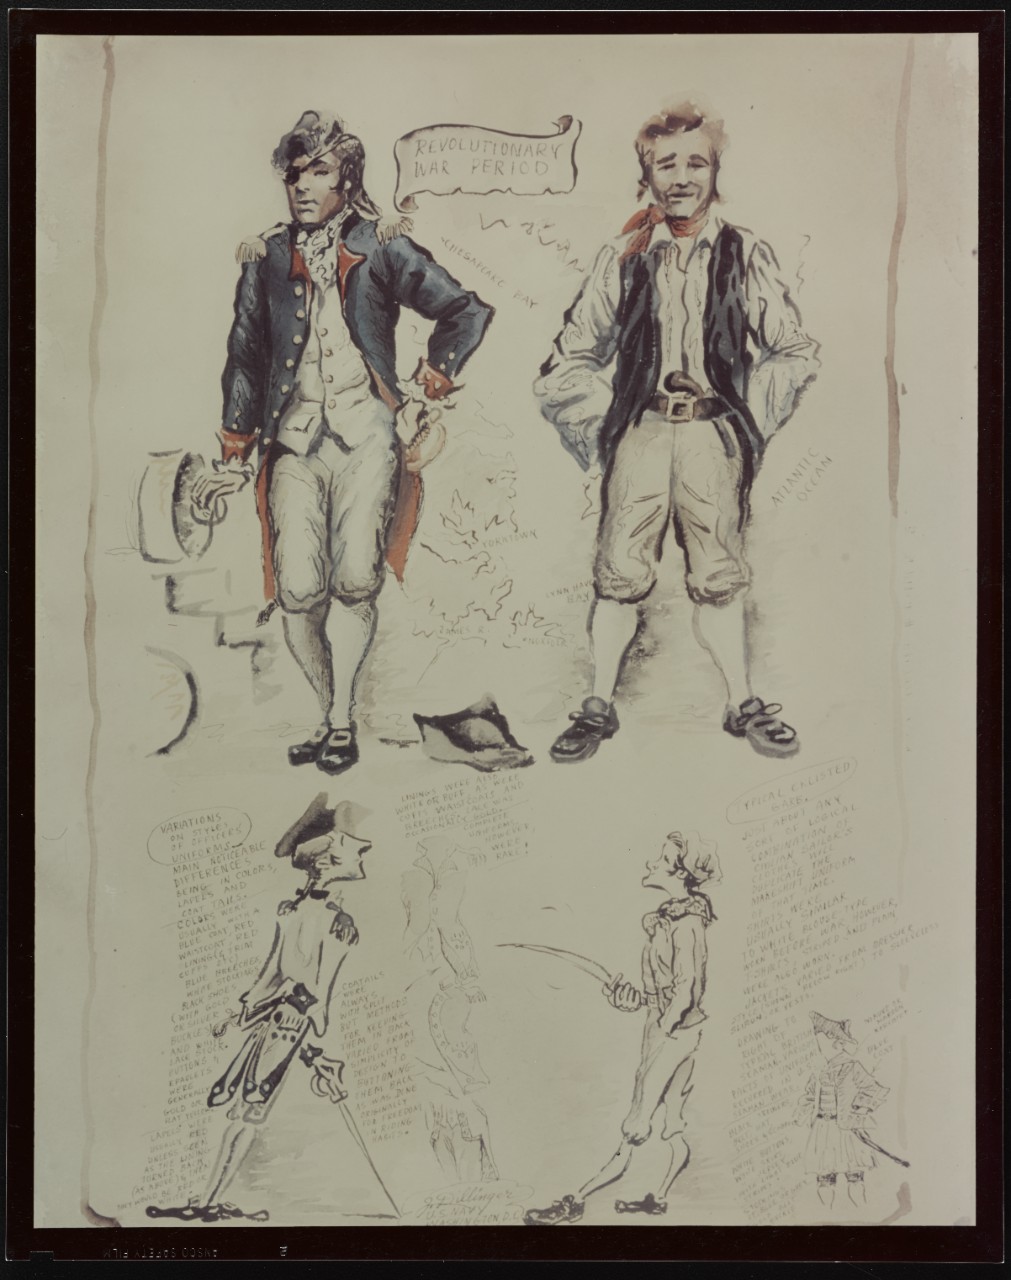 Drawing of Uniforms, Typical Enlisted Garb from Revolutionary War Period